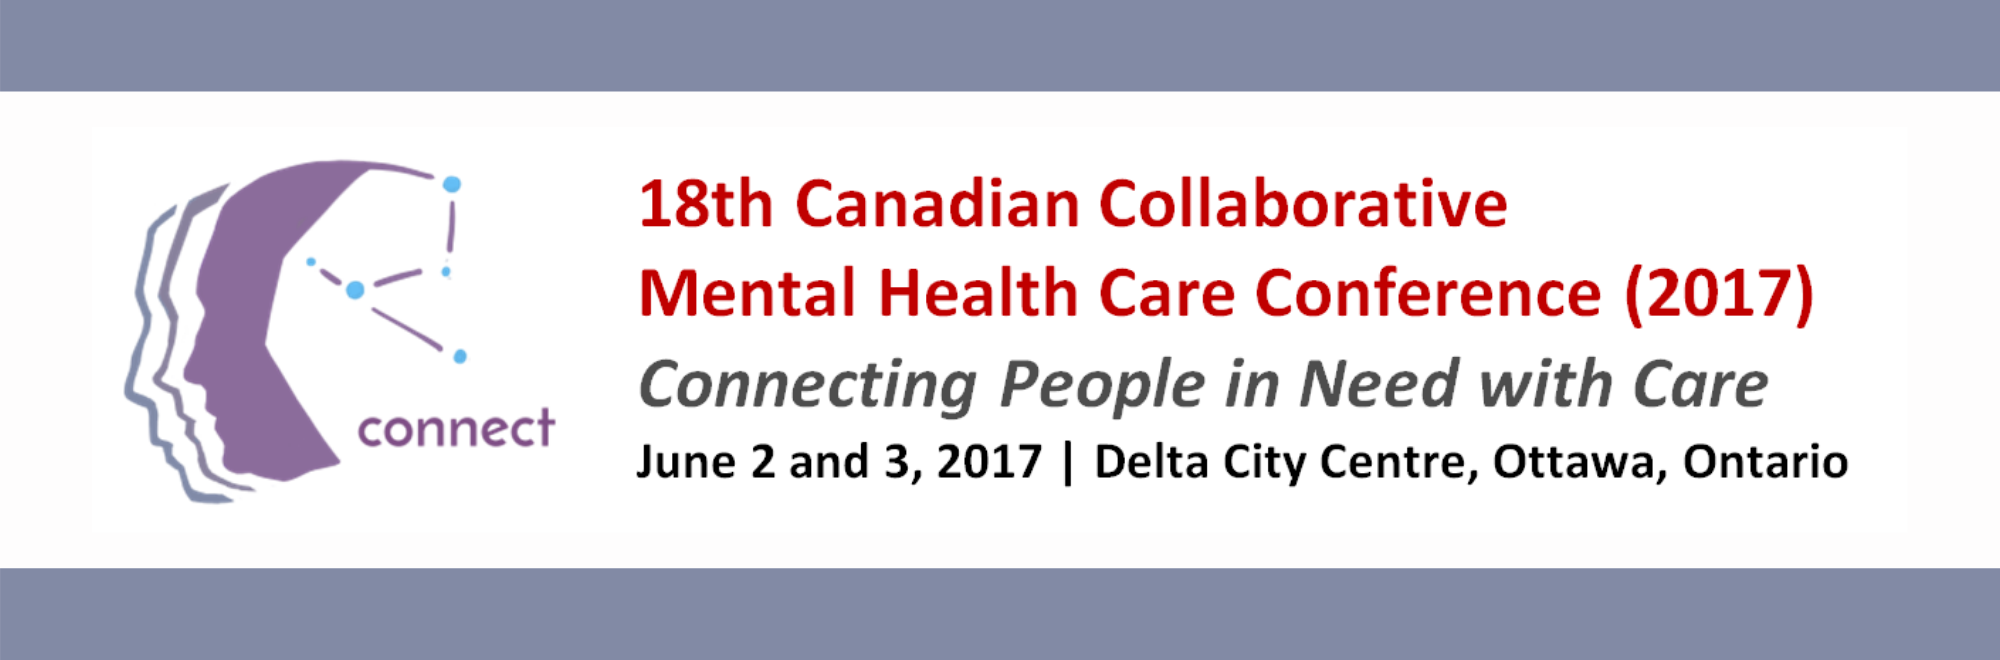 About the Canadian Collaborative Mental Health Conference Integrated